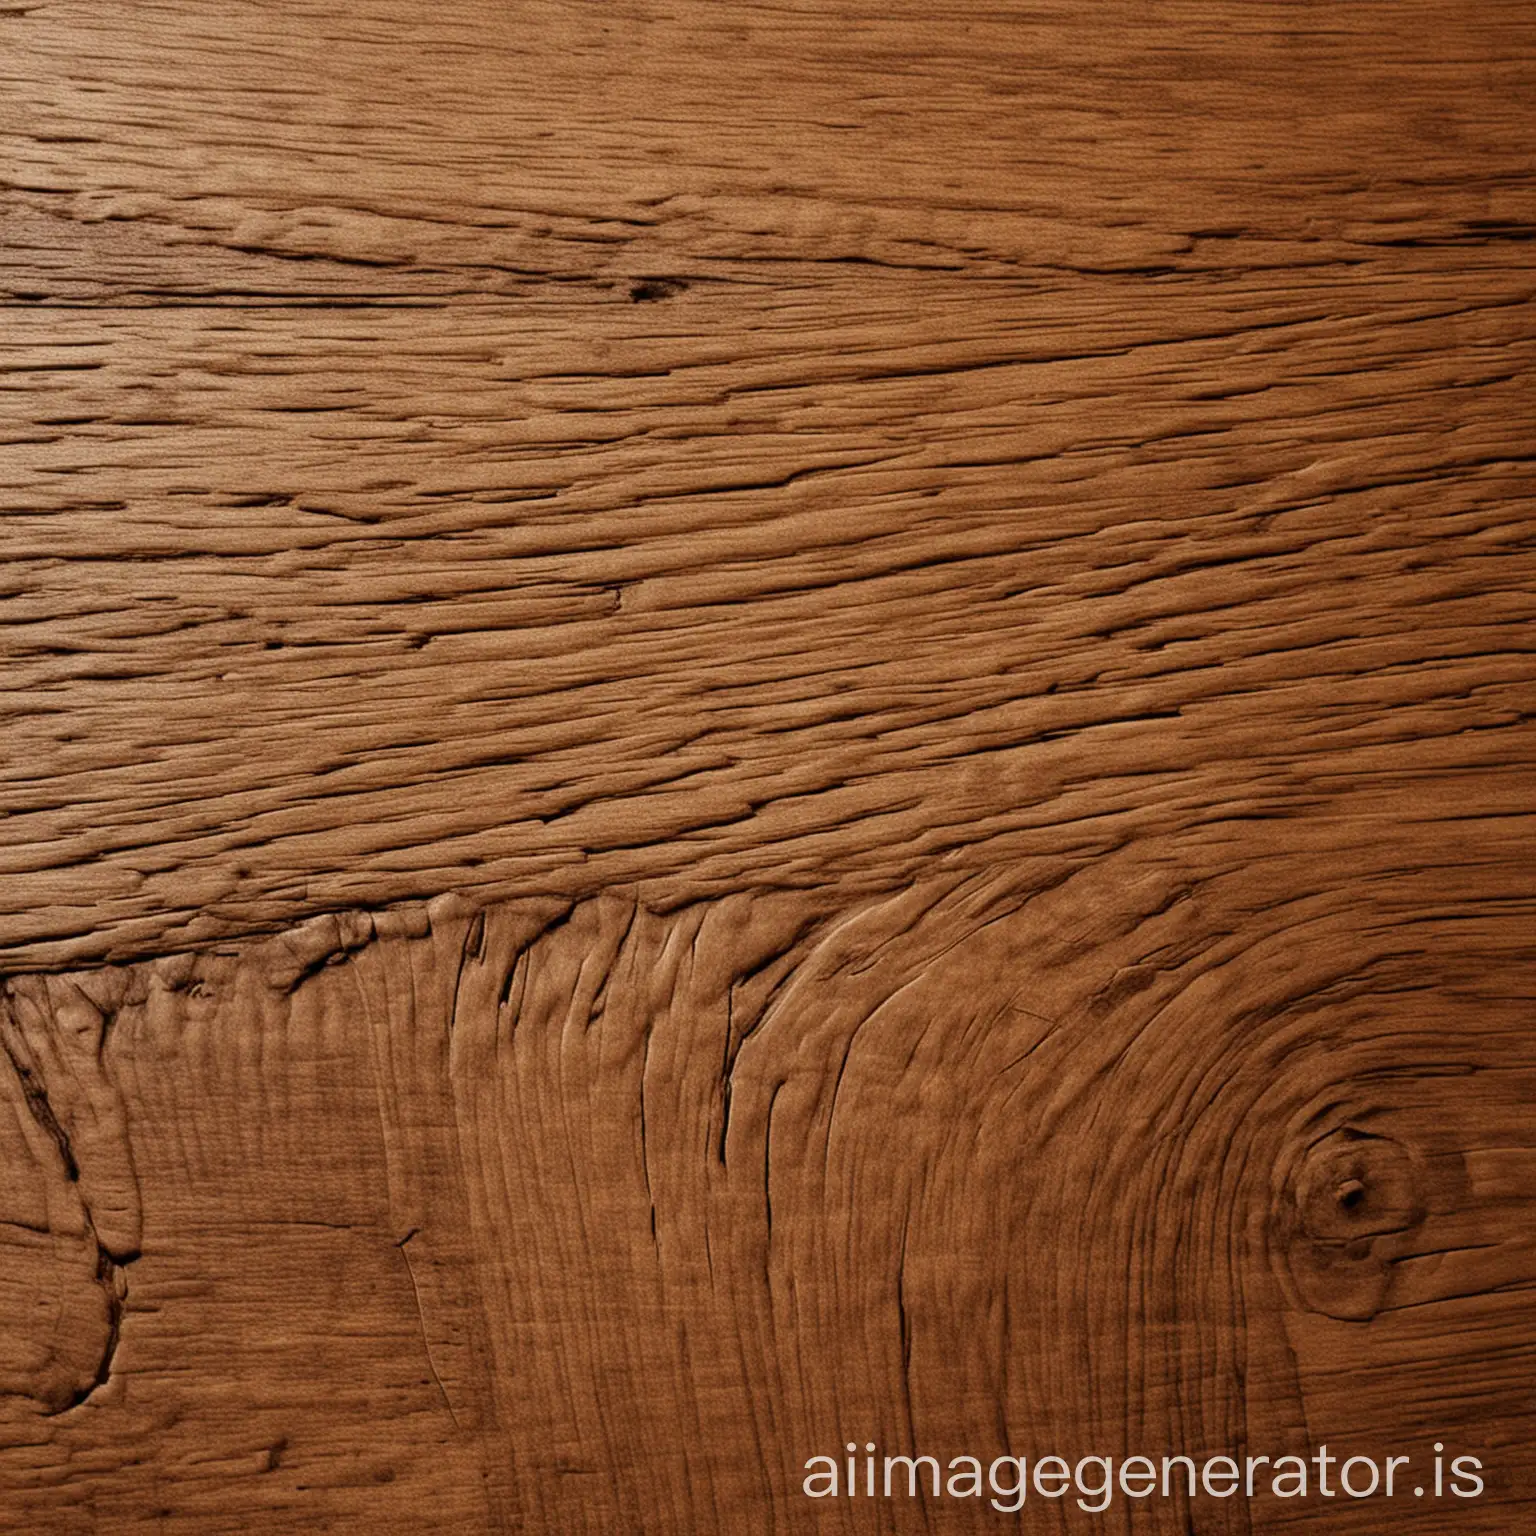 Realistic-Wood-Texture-Background-for-Artistic-Designs